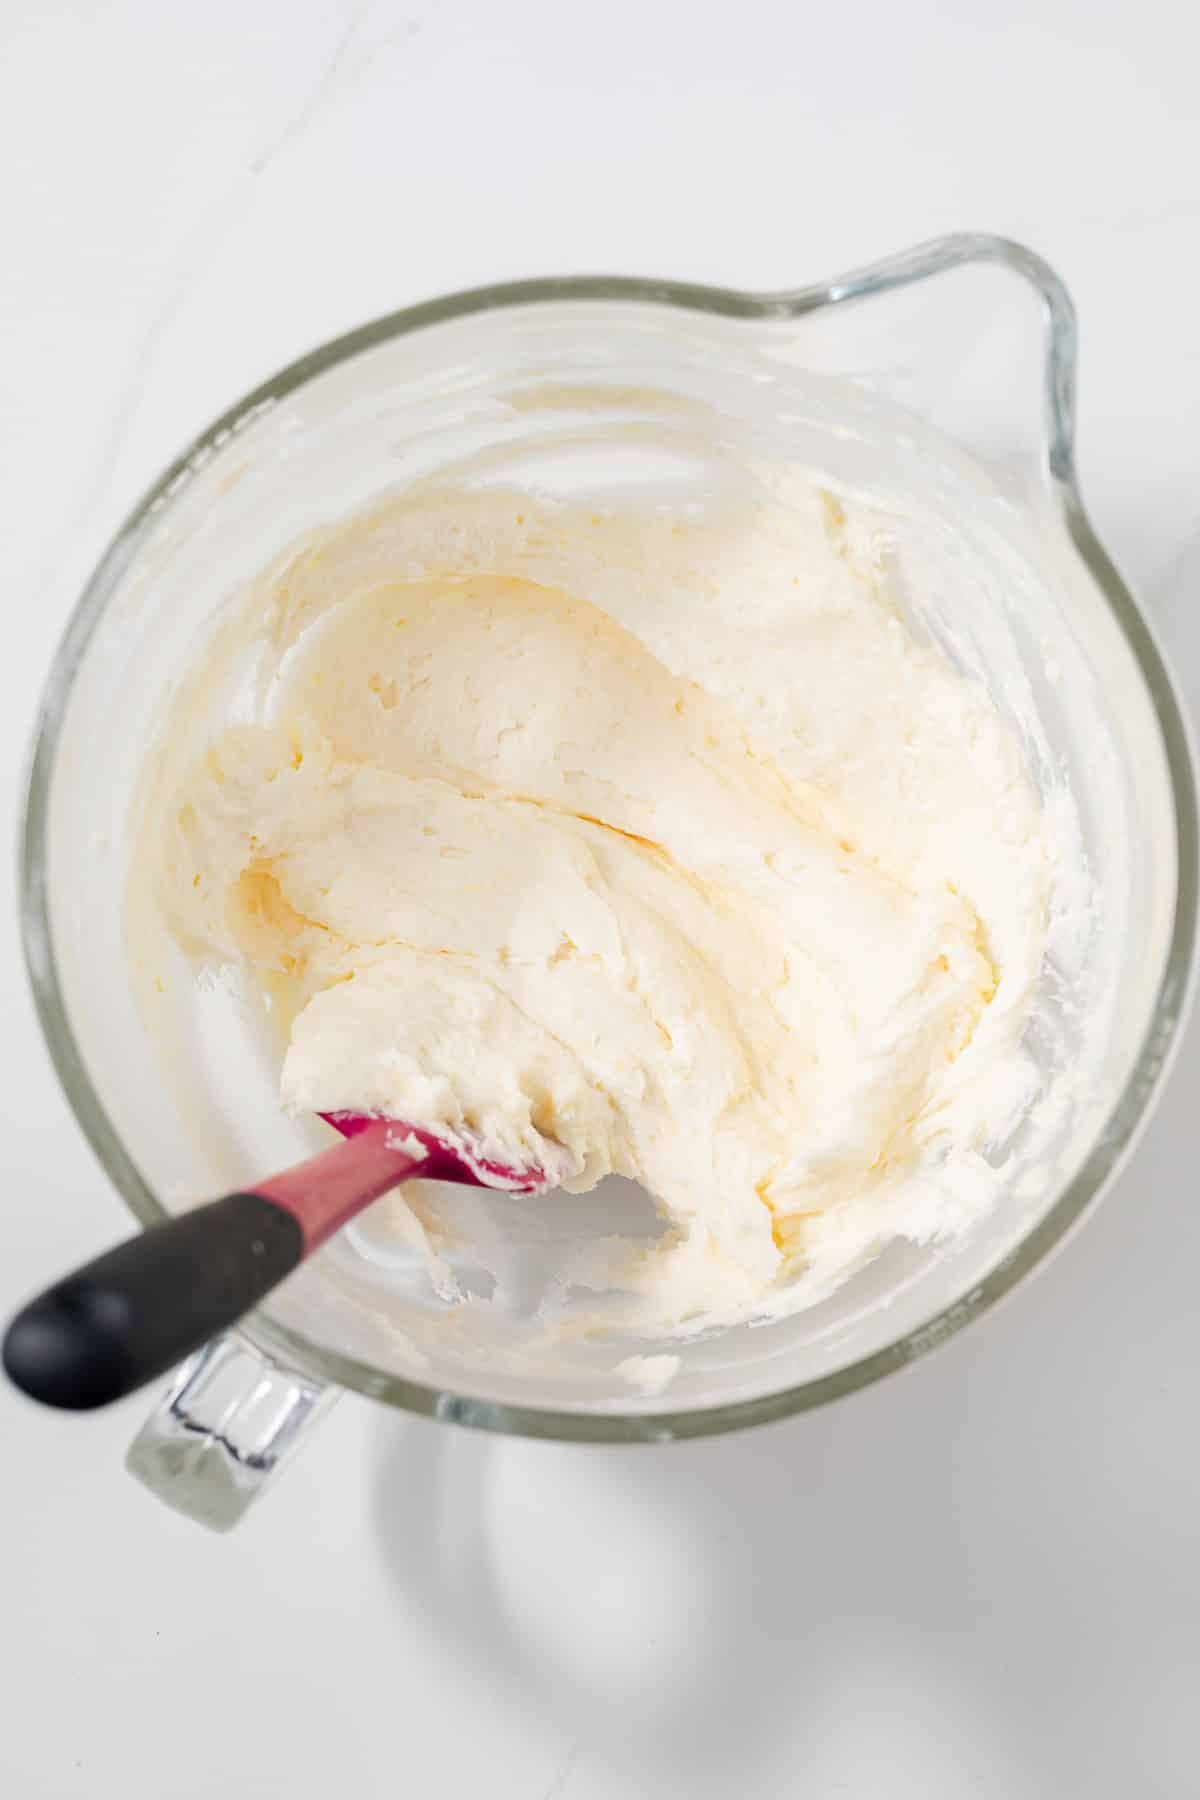 Lemon frosting in a glass bowl.